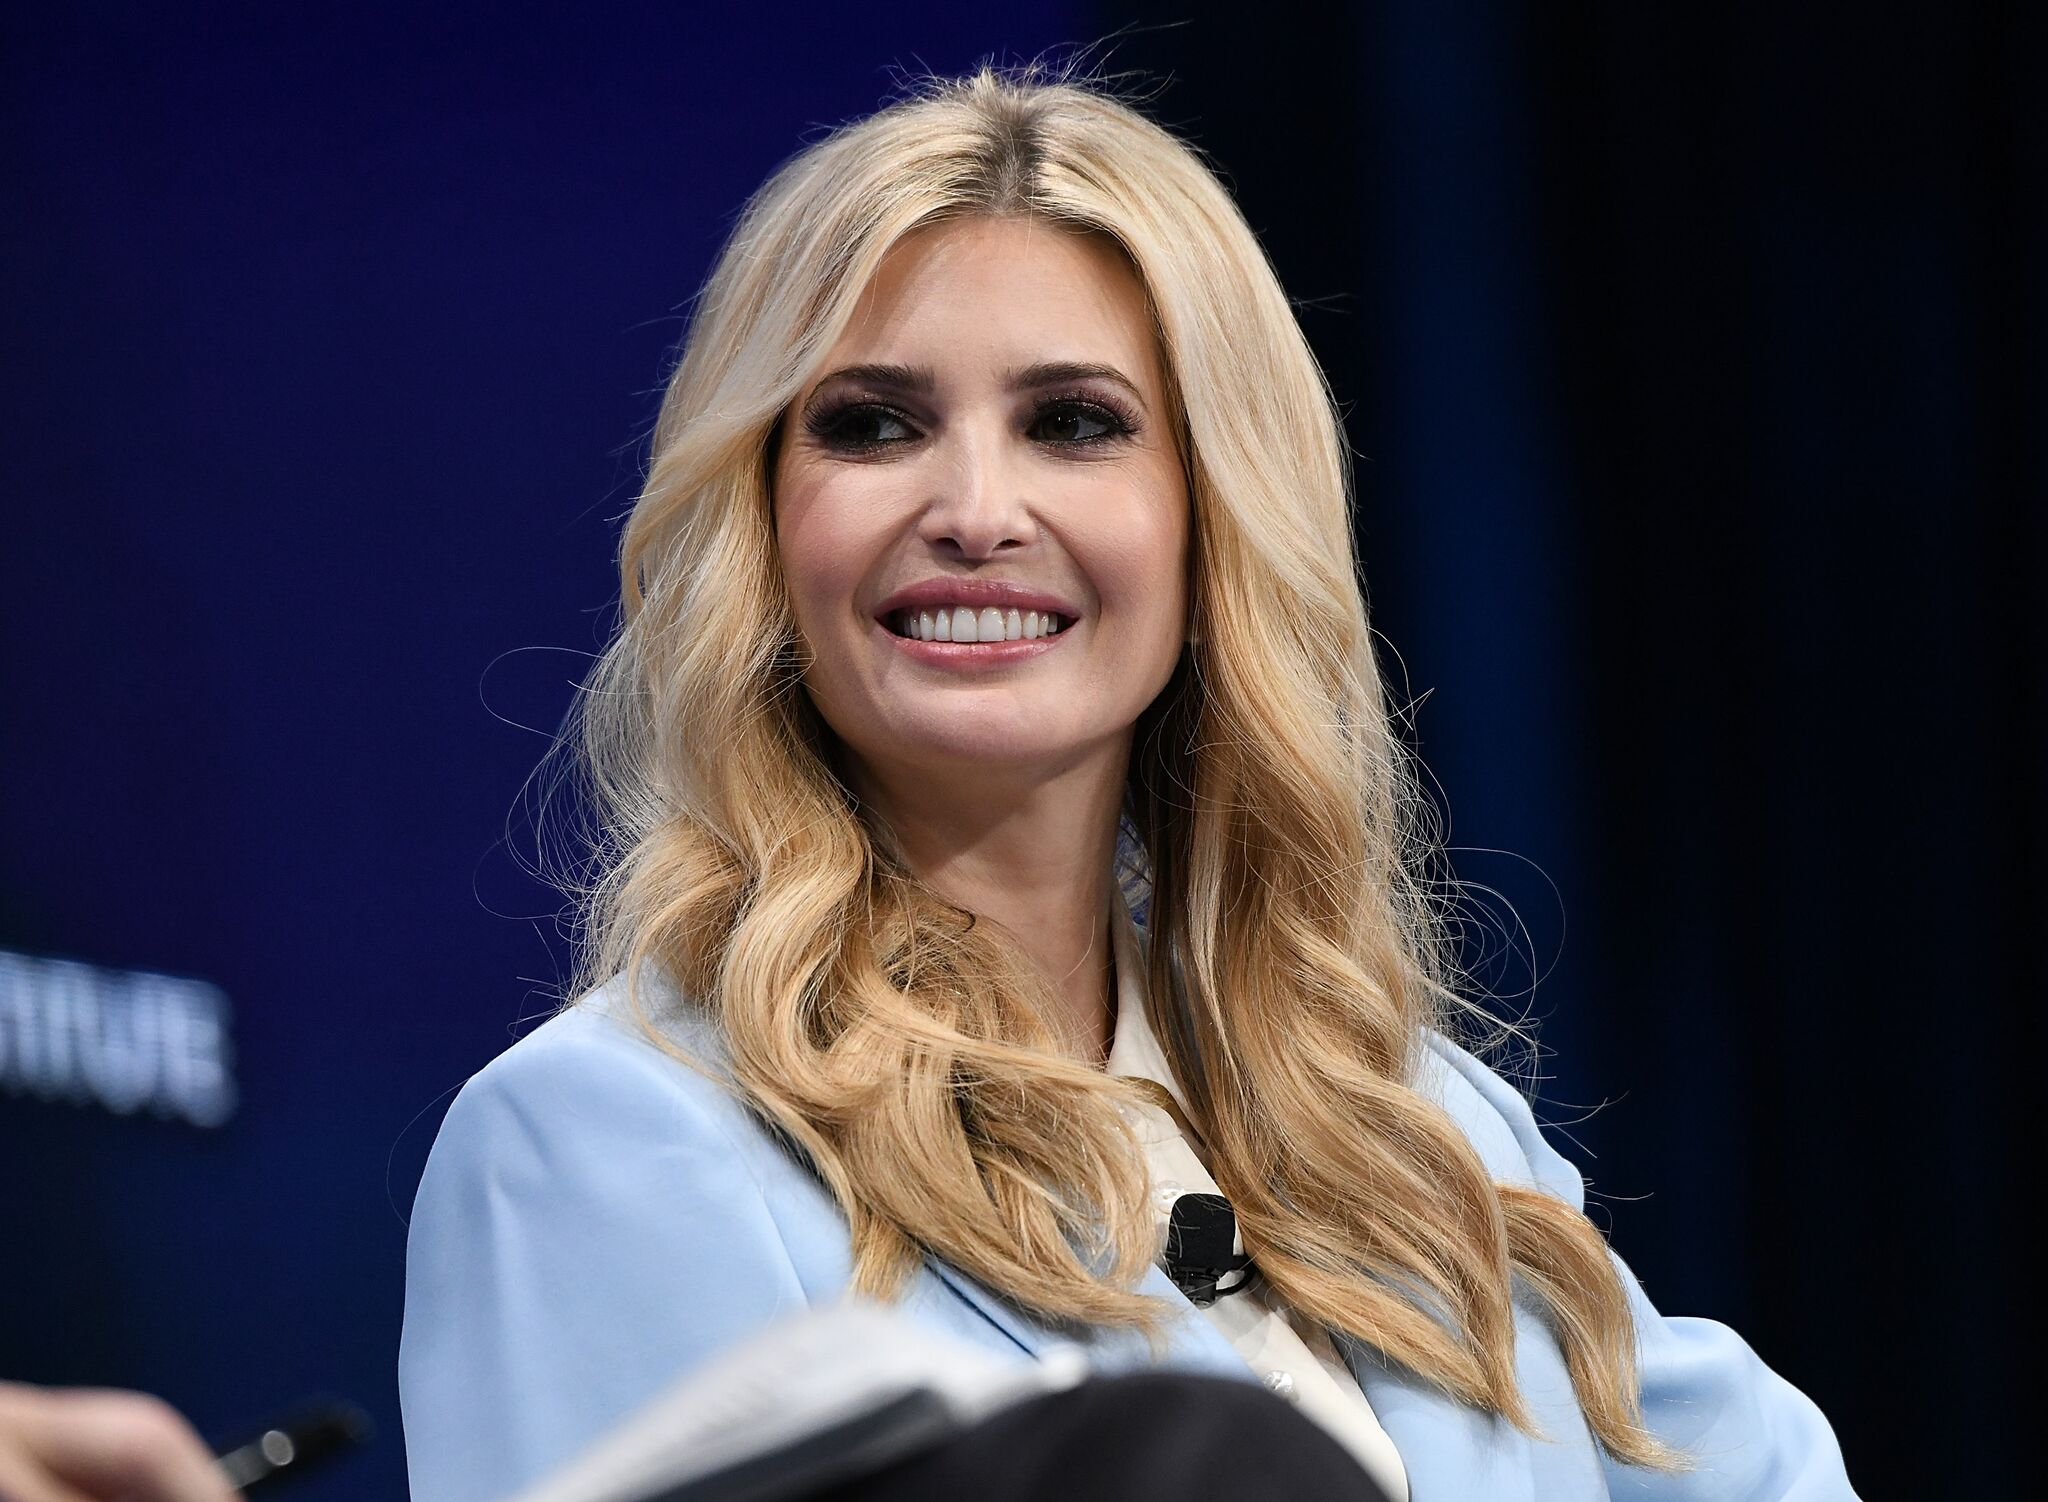 Ivanka Trump, Advisor to the President, The White House, participates in a panel discussion during the annual Milken Institute Global Conference at The Beverly Hilton Hotel on April 28, 2019 | Photo: Getty Images